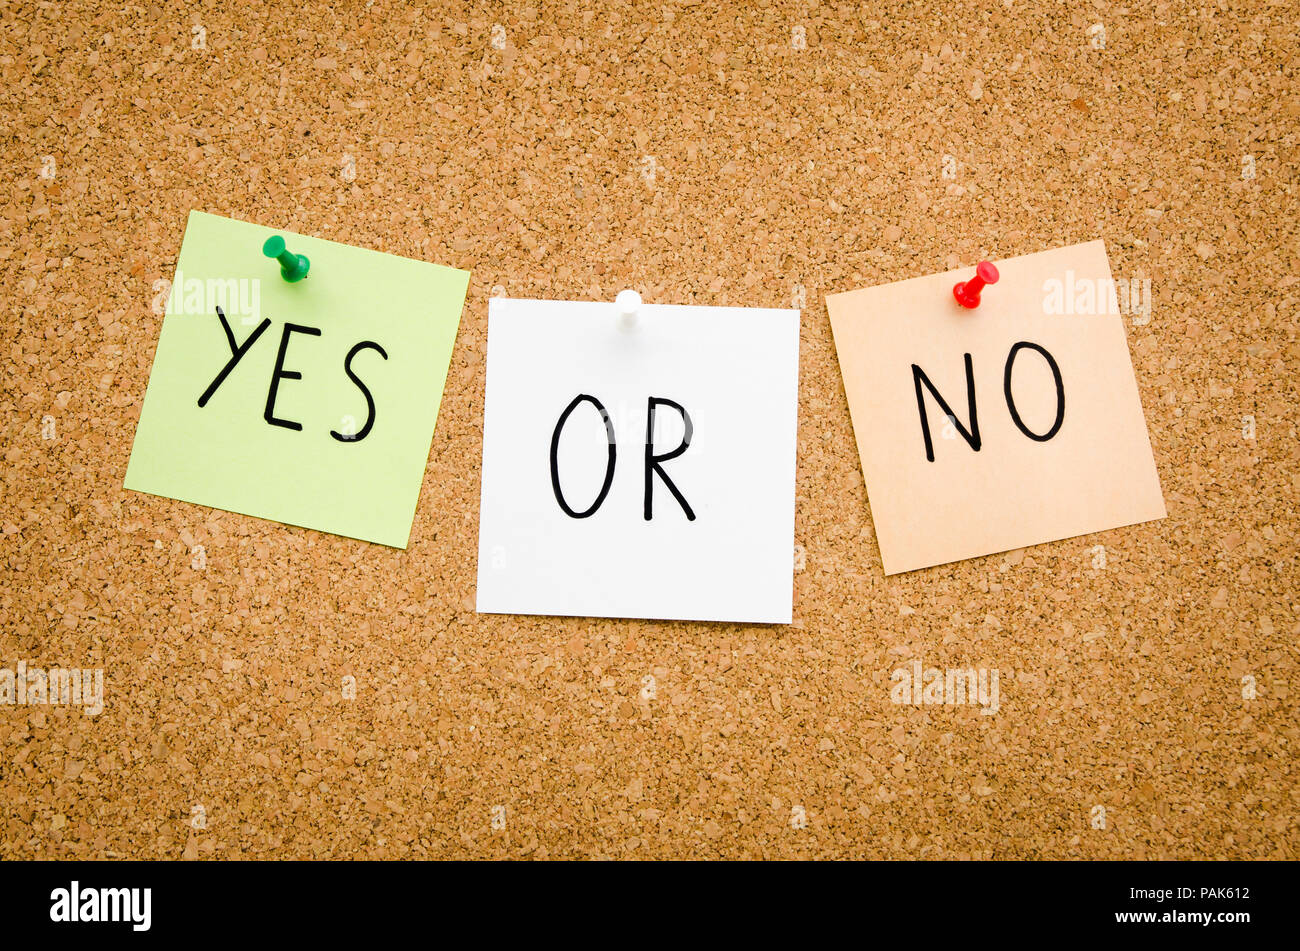 YES OR NO written on red white and green post notes pinned to a board suggesting options to accept or deny in a bussines look in landscape mode Stock Photo